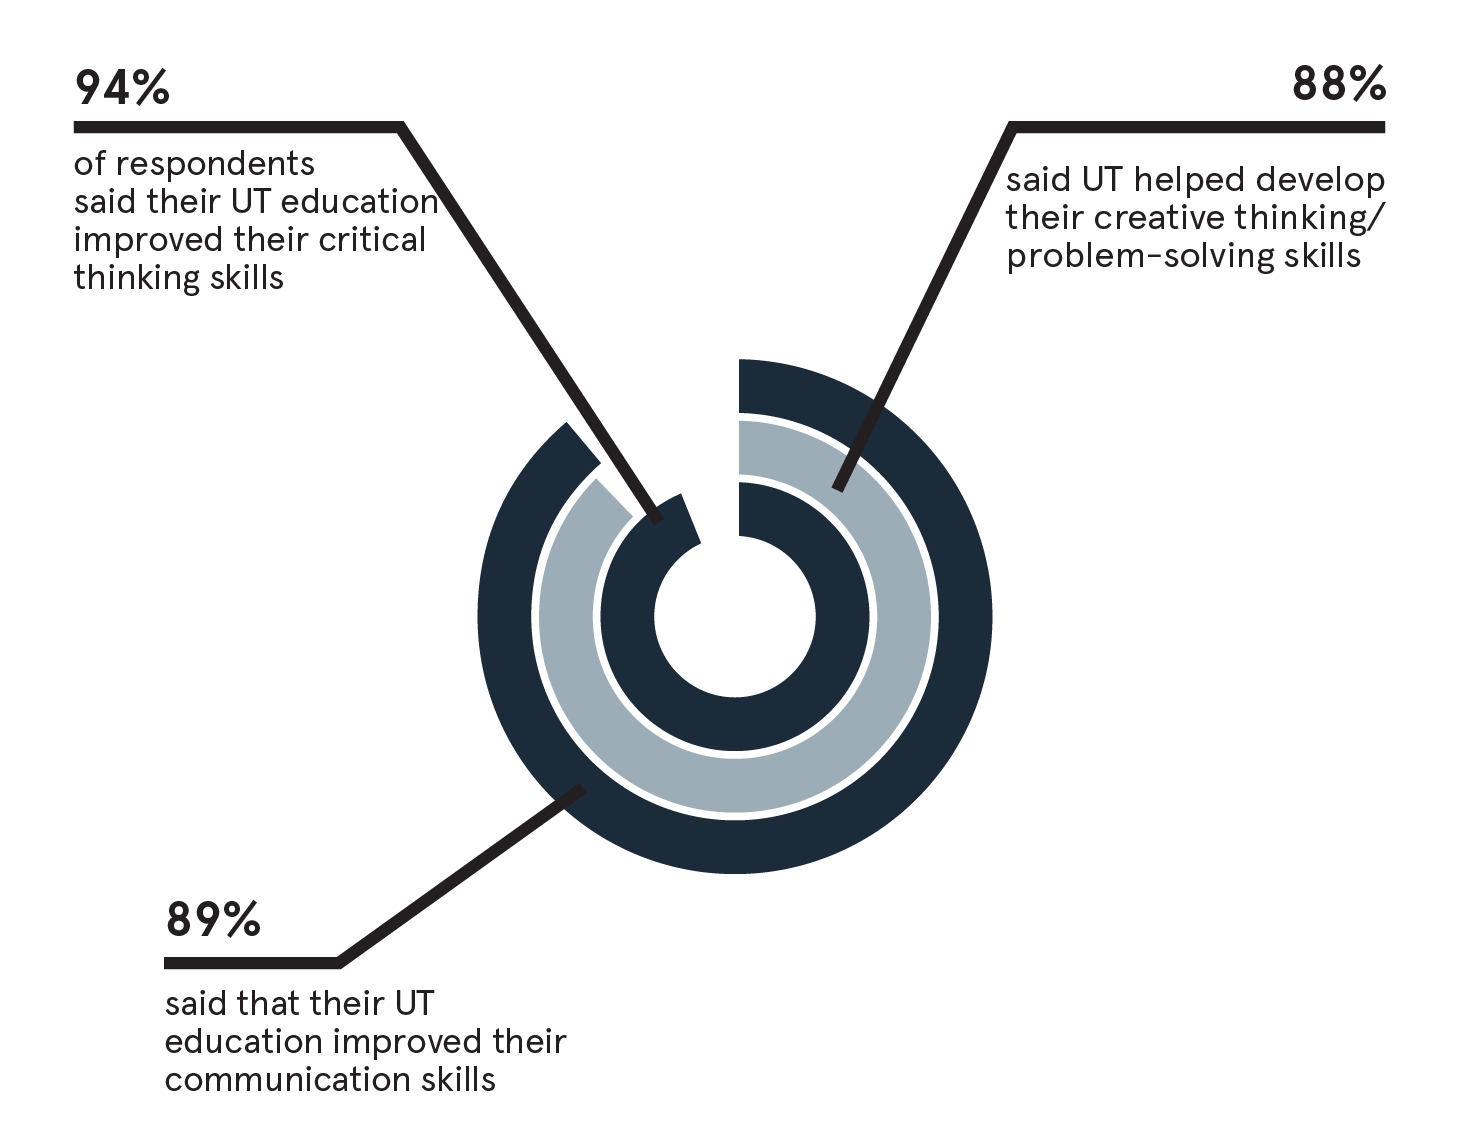 Infographic showing 94% of respondents said their UT education improved their critical thinking skills; 88% said UT helped develop their creative thinking/problem-solving skills; 89% said that their UT education improved their communication skills